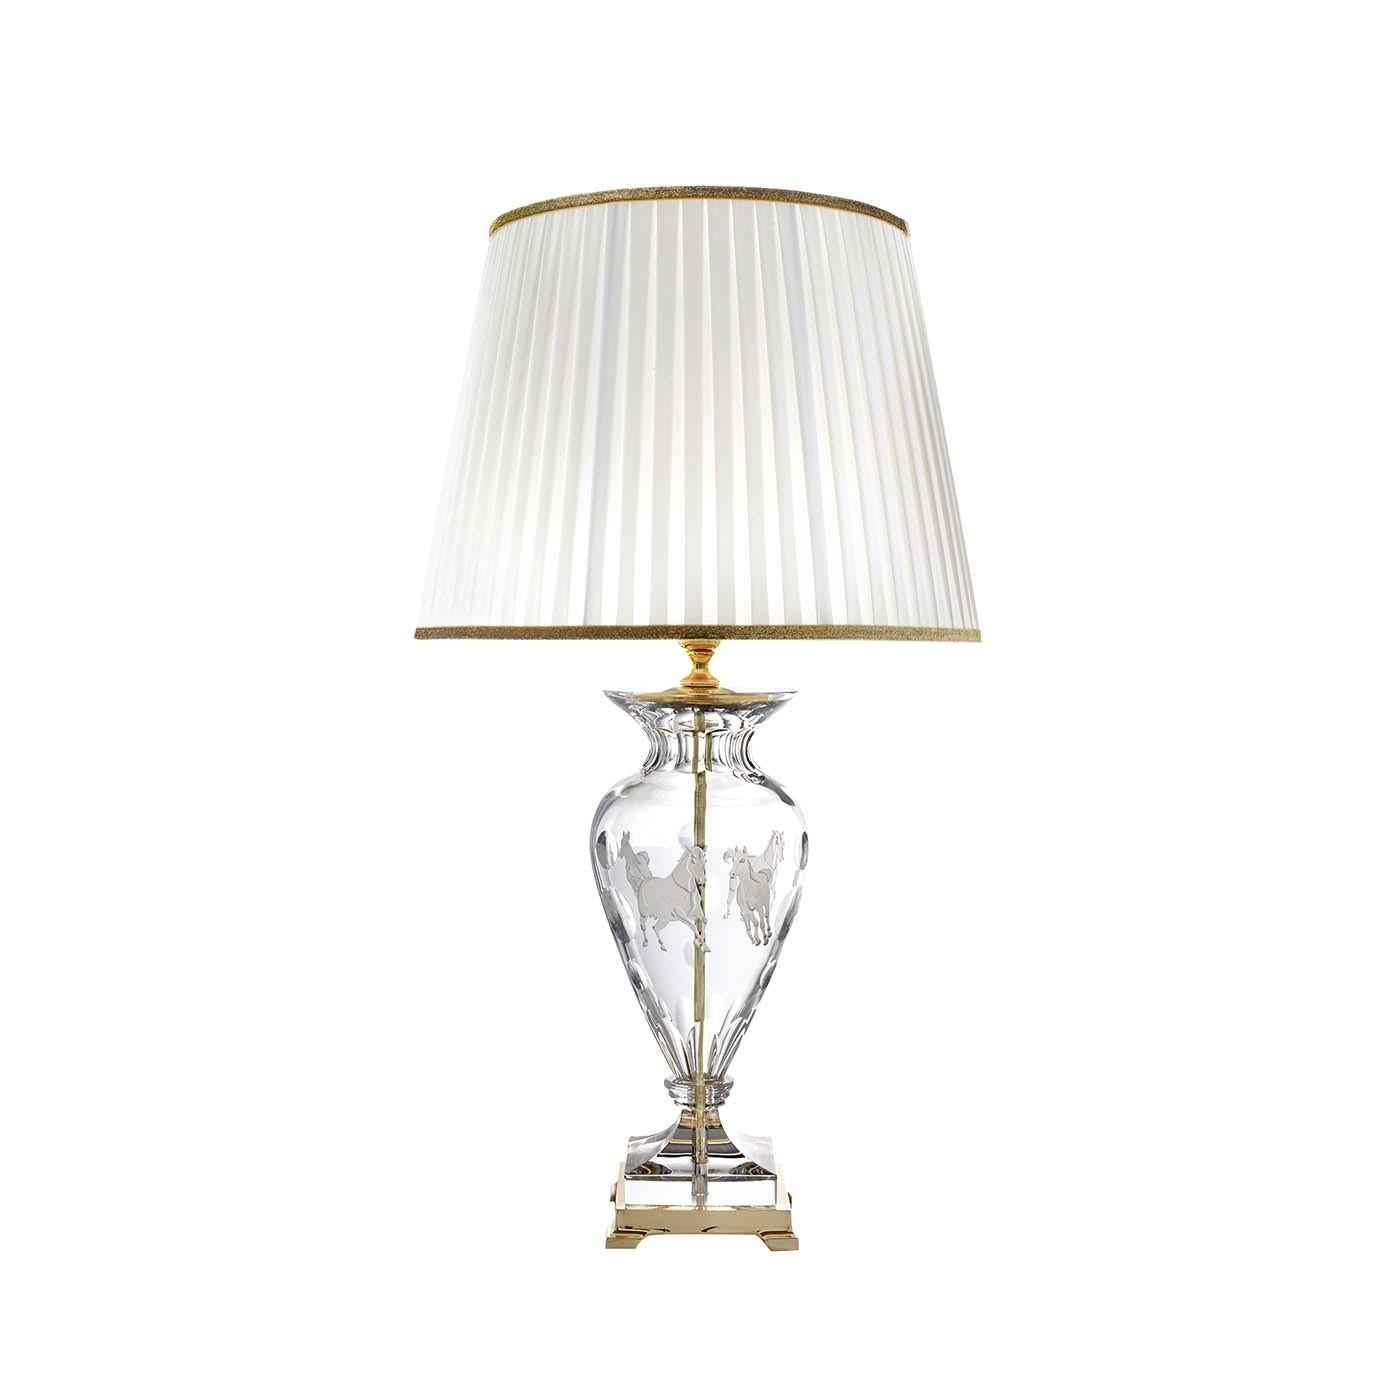 This stunning table lamp will complement a classic decor, thanks to its elegant silhouette, high-quality materials, and traditional allure. The structure is in clear Italian crystal and boasts an engraved decoration of galloping horses, depicted in